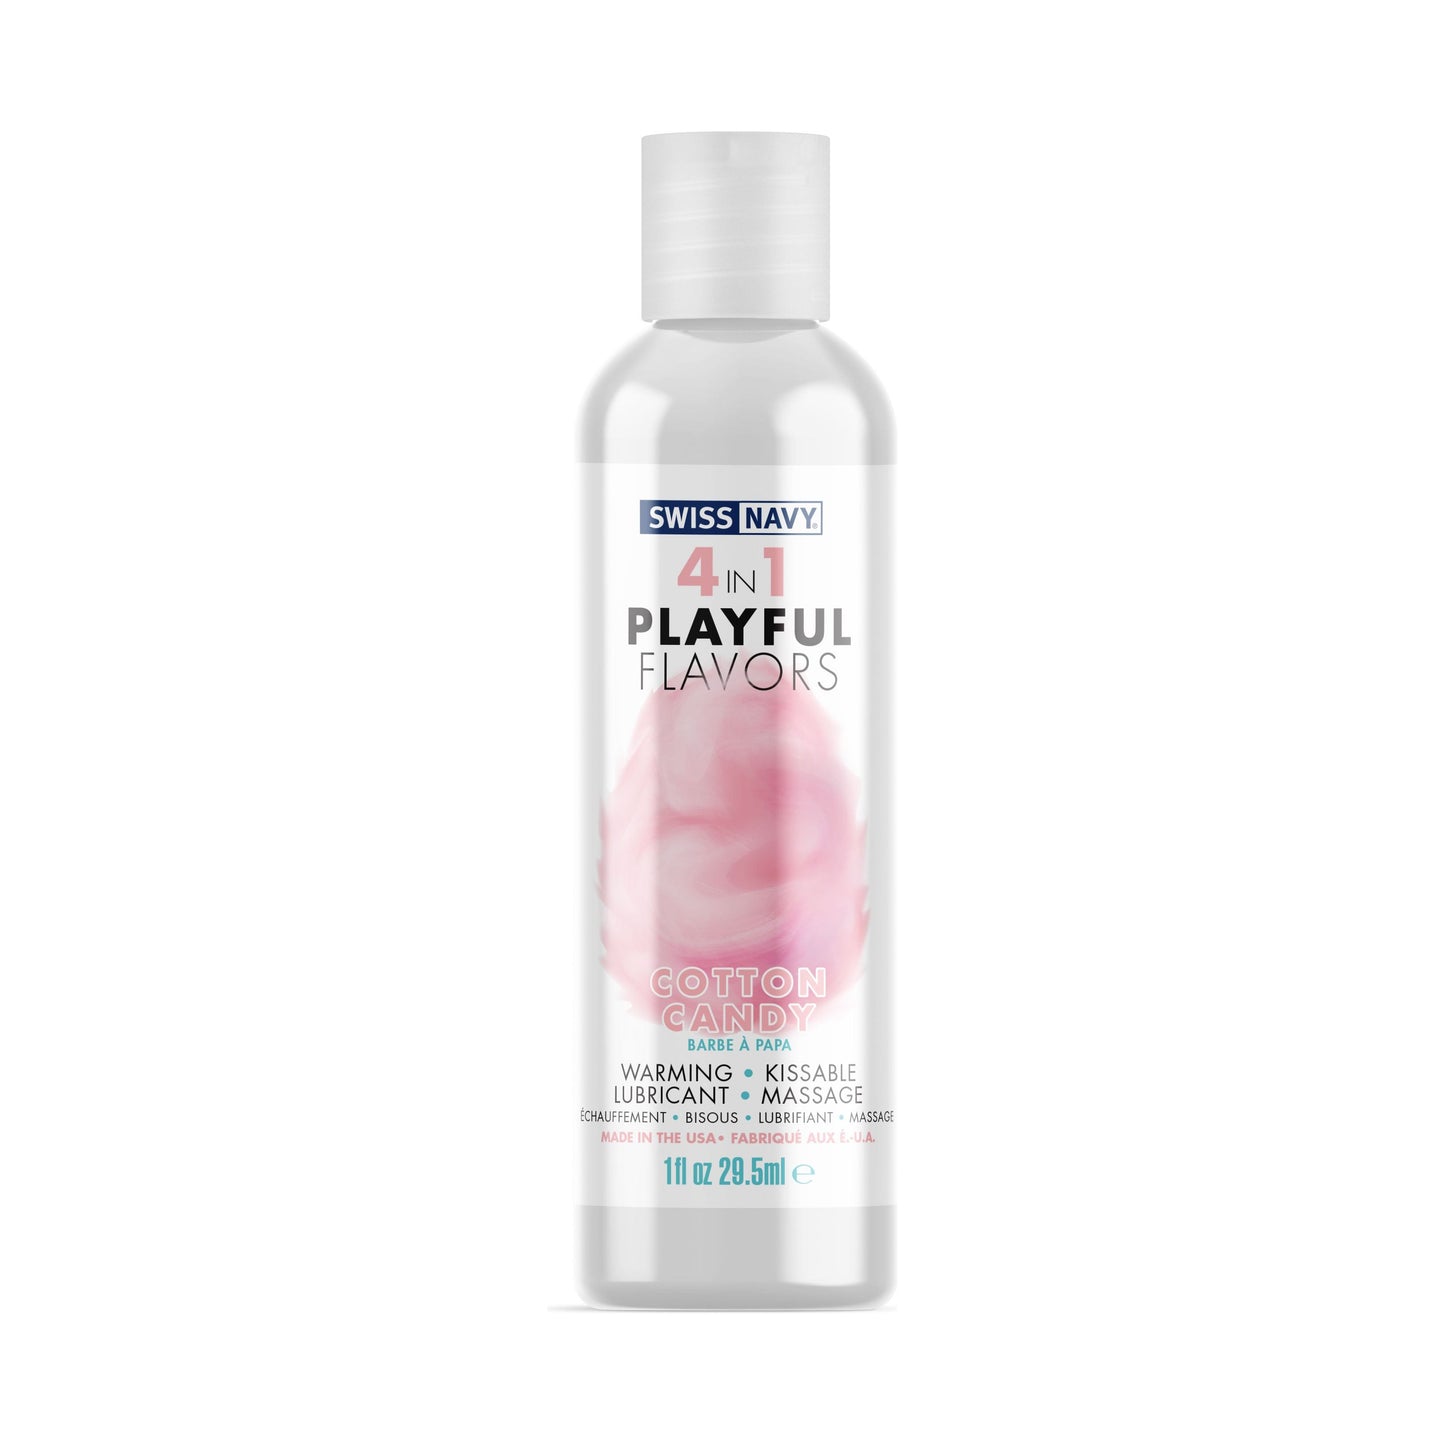 Swiss Navy 4-in-1 Playful Flavors - Cotton Candy 1 Oz MD-SN4N1FCC1